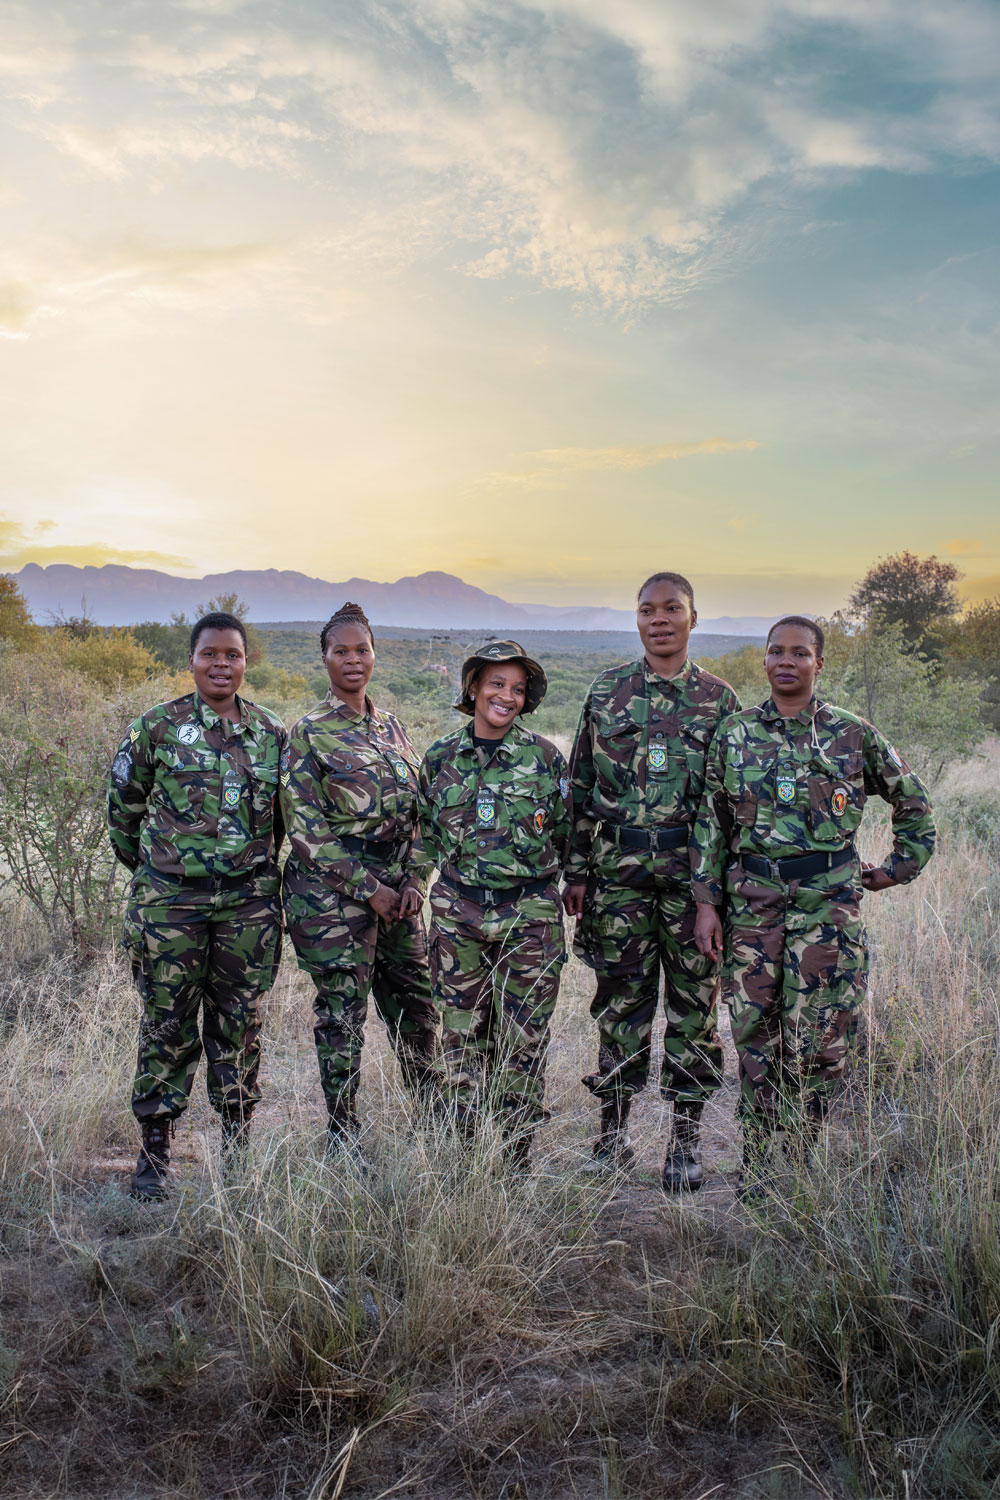 I Stayed With The World's First All Female Wildlife Ranger Unit